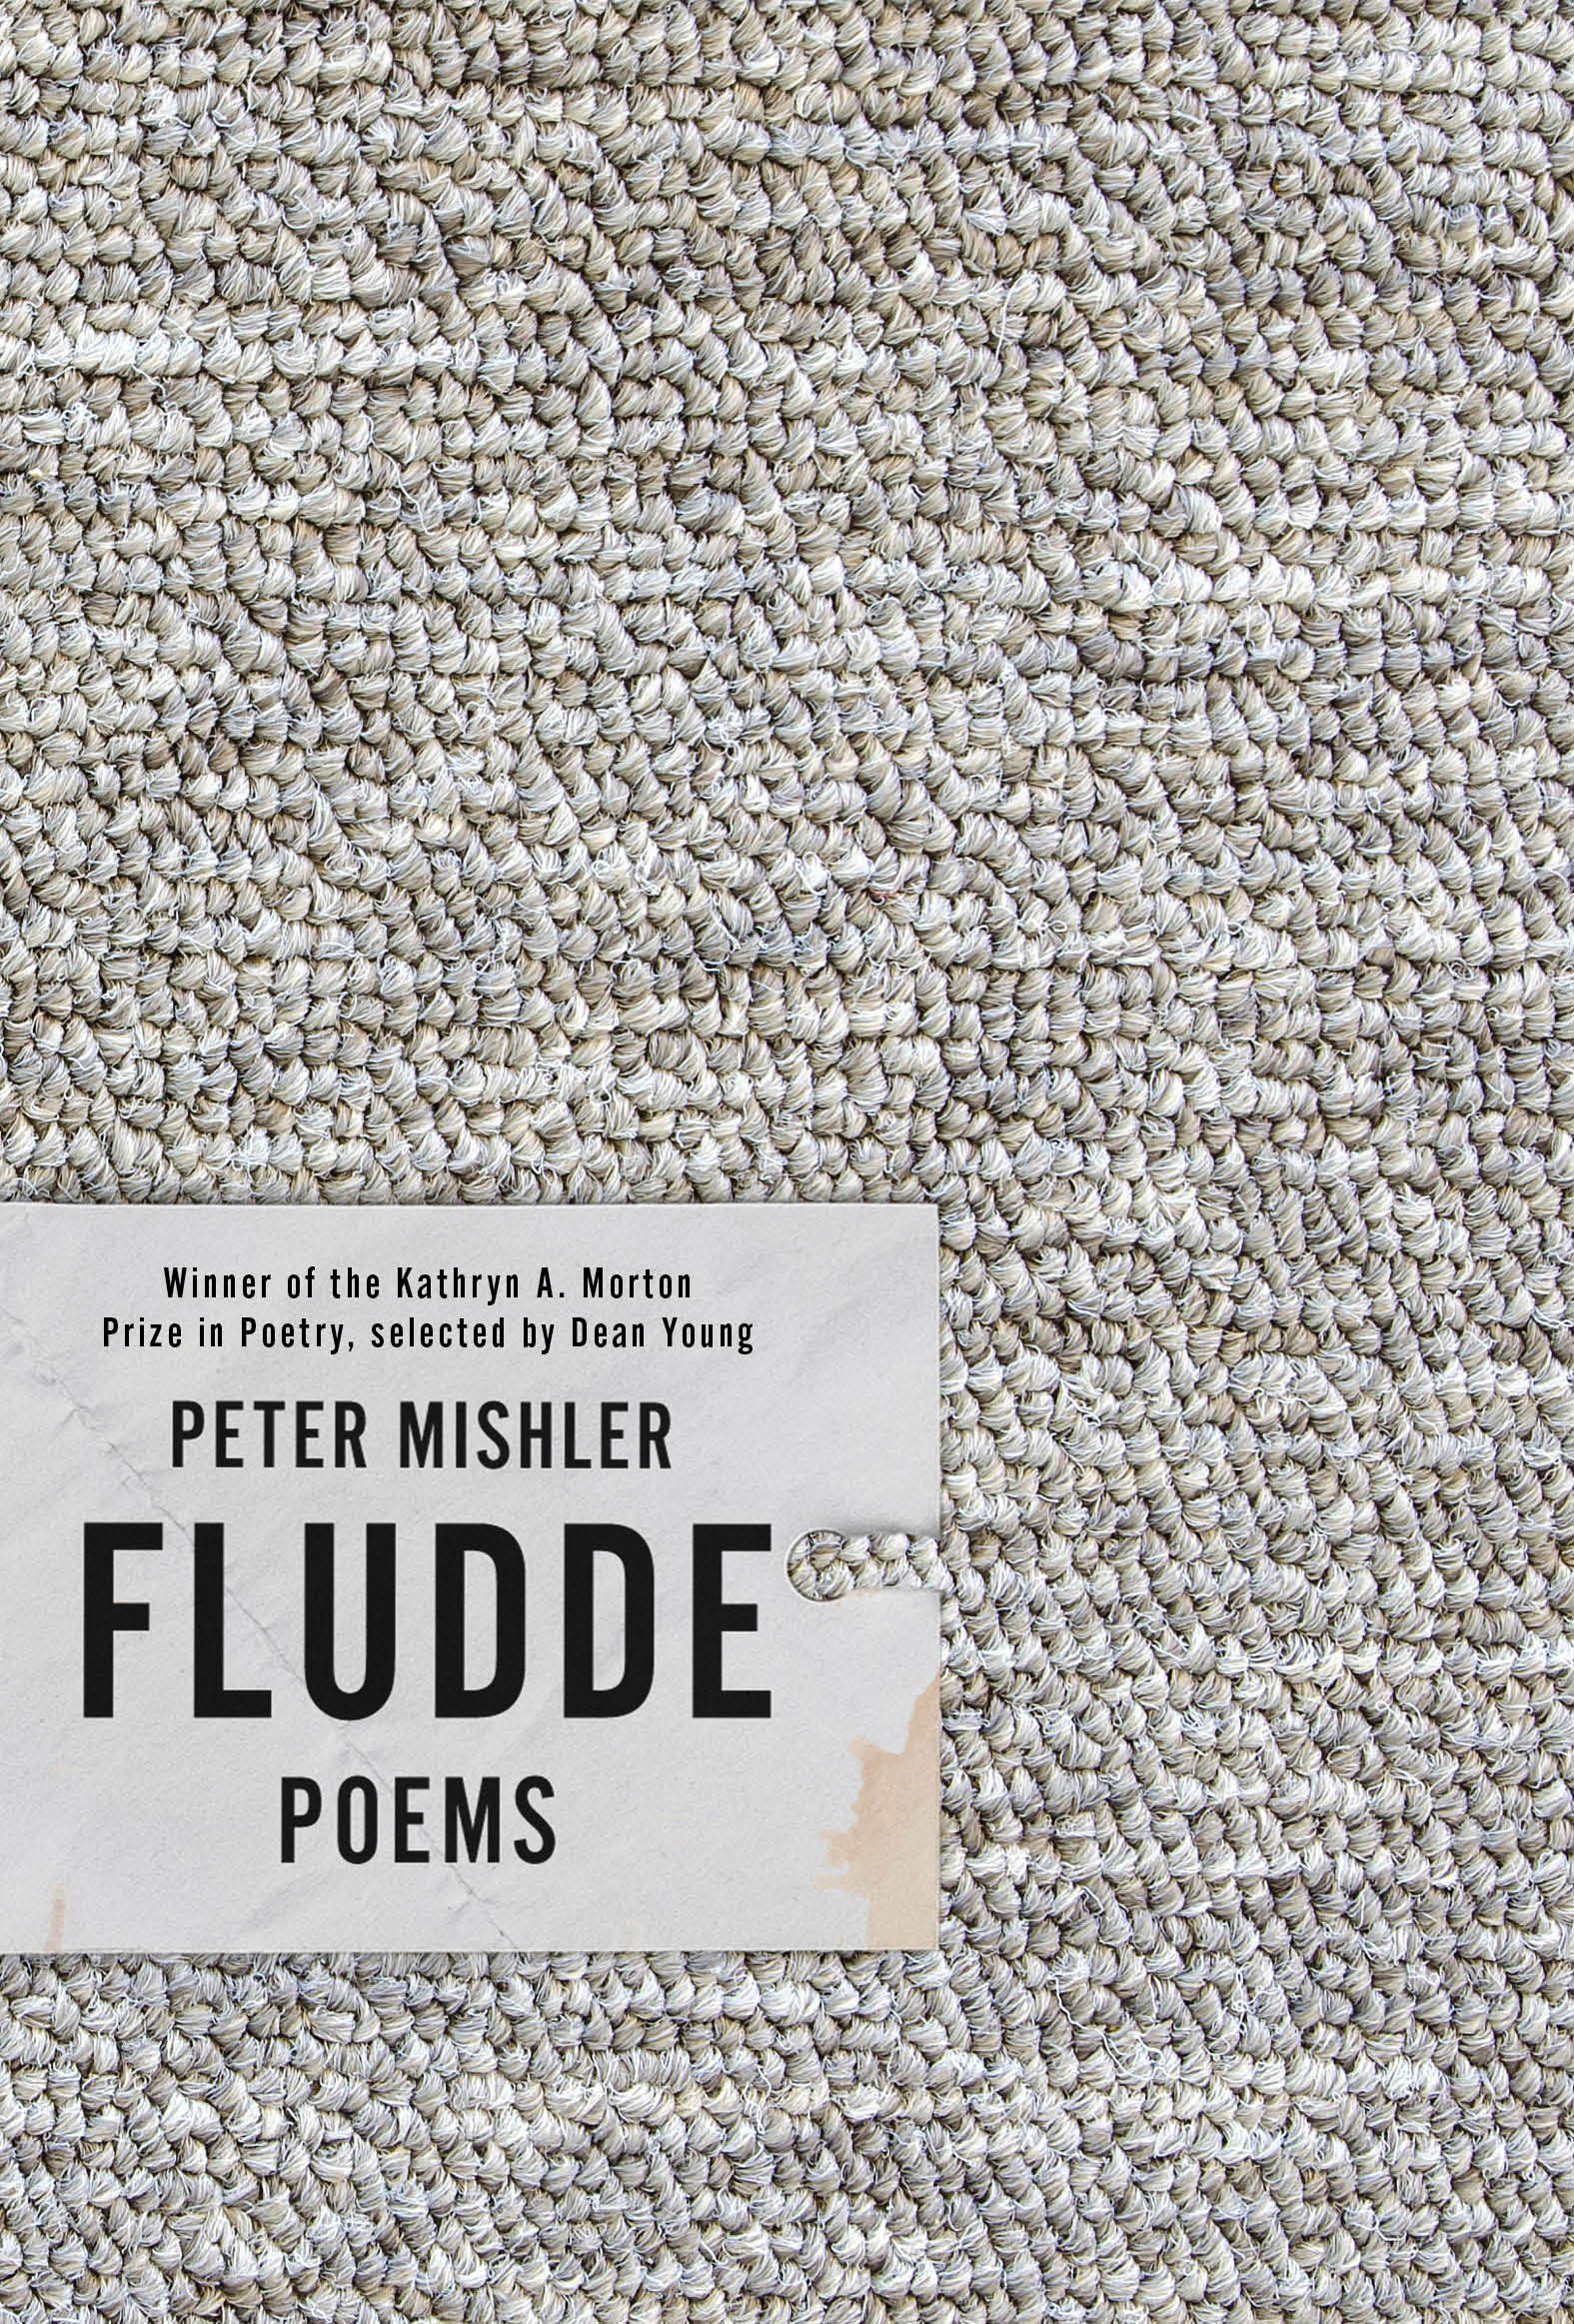 “The History of Your Private Life”: On Peter Mishler’s “Fludde”